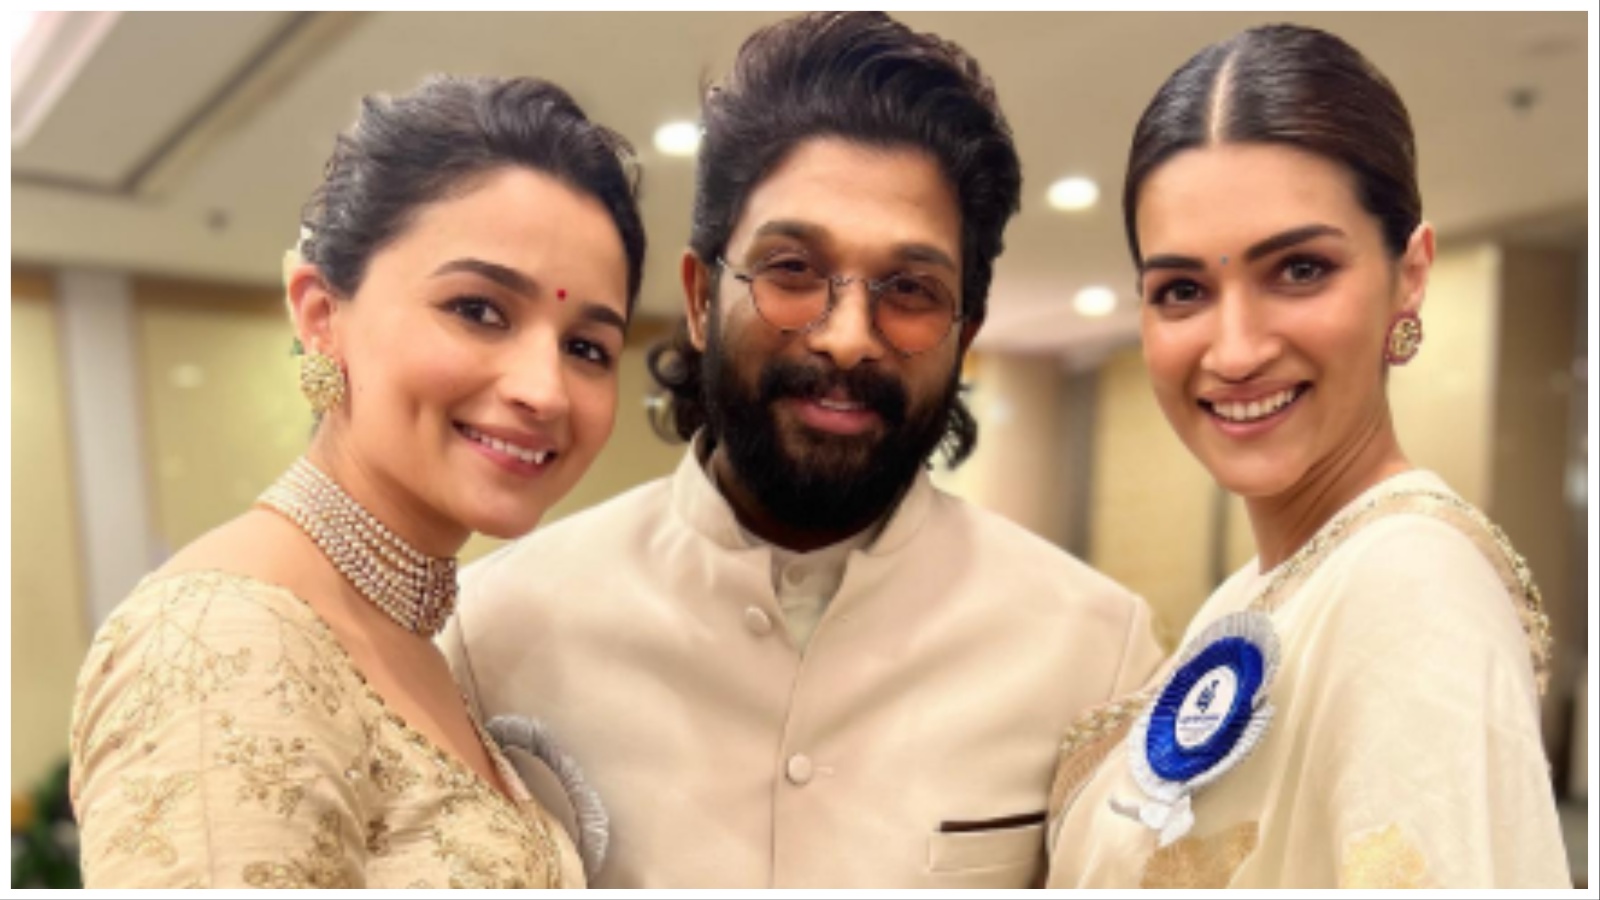 Kriti Sanonxxxvideo - Kriti Sanon shares pics with Allu Arjun and Alia Bhatt from National  Awards: 'Happy faces sharing a proud moment' | Bollywood News - The Indian  Express